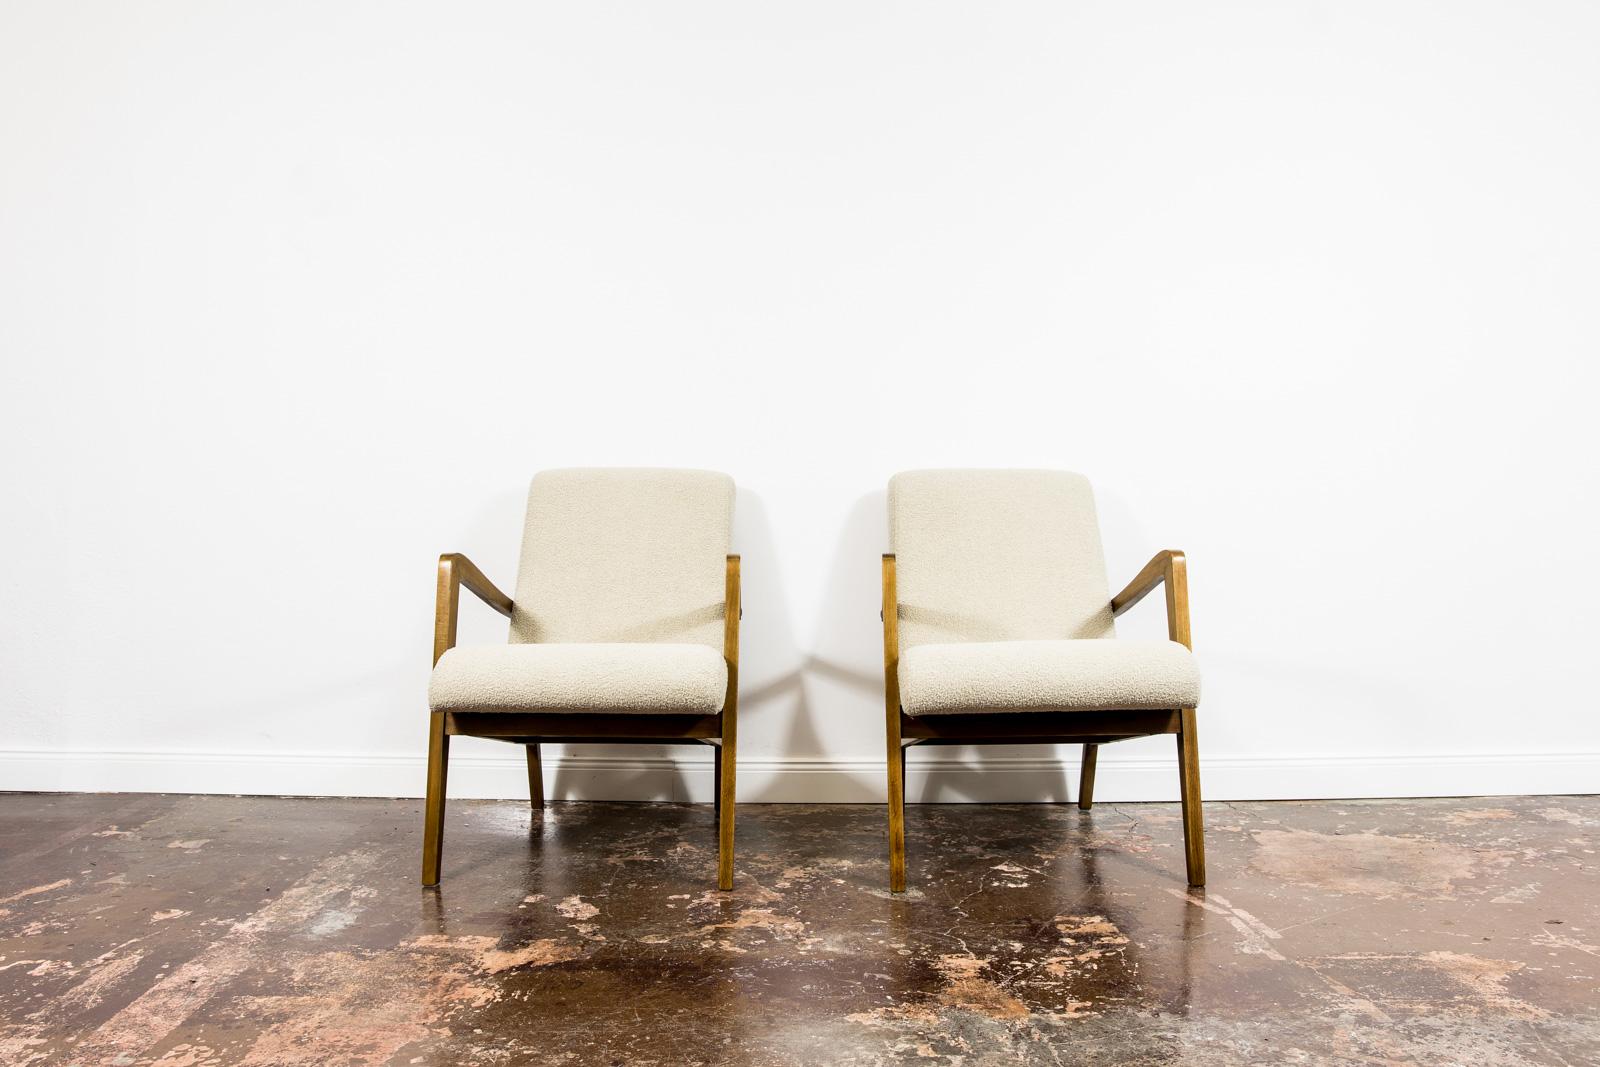 Pair of Mid-Century armchairs from Bystrzyckie Fabryki Mebli 1960's, Poland.
Solid beech wood frames have been completely restored and refinished.
Reupholstered in beige soft fabric.